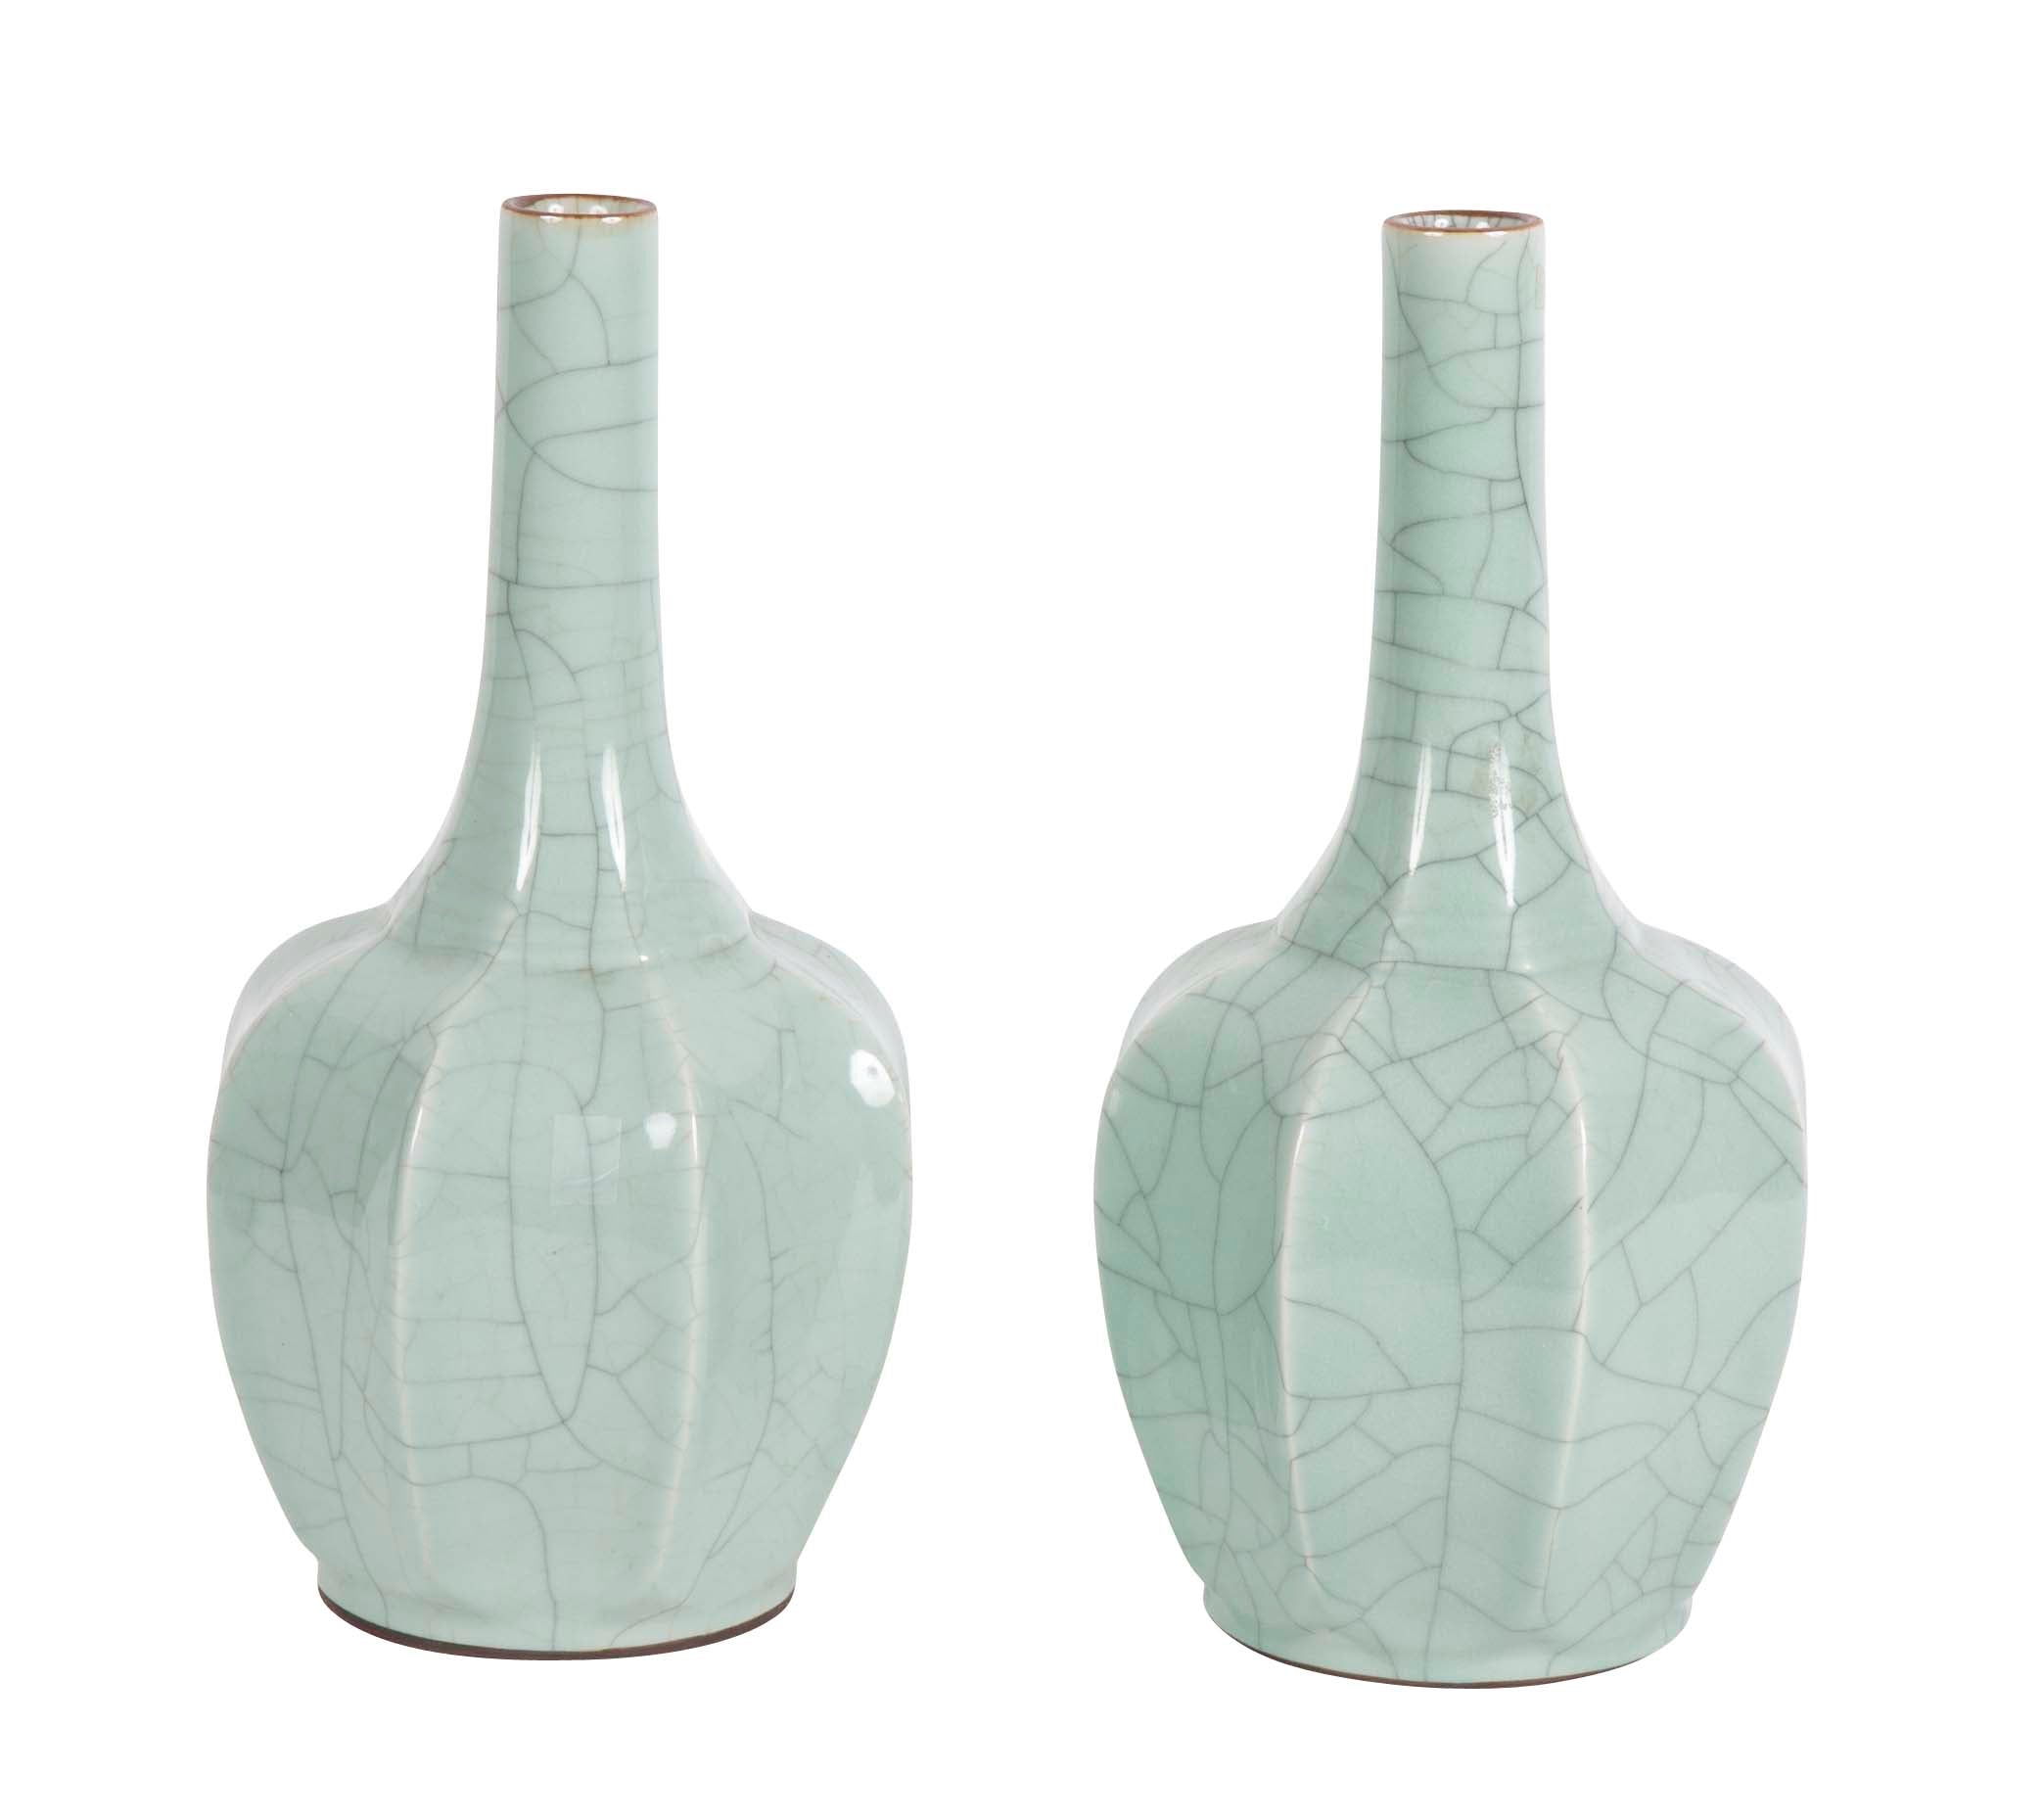 Pair of 19th Century Chinese Guan Type Vases